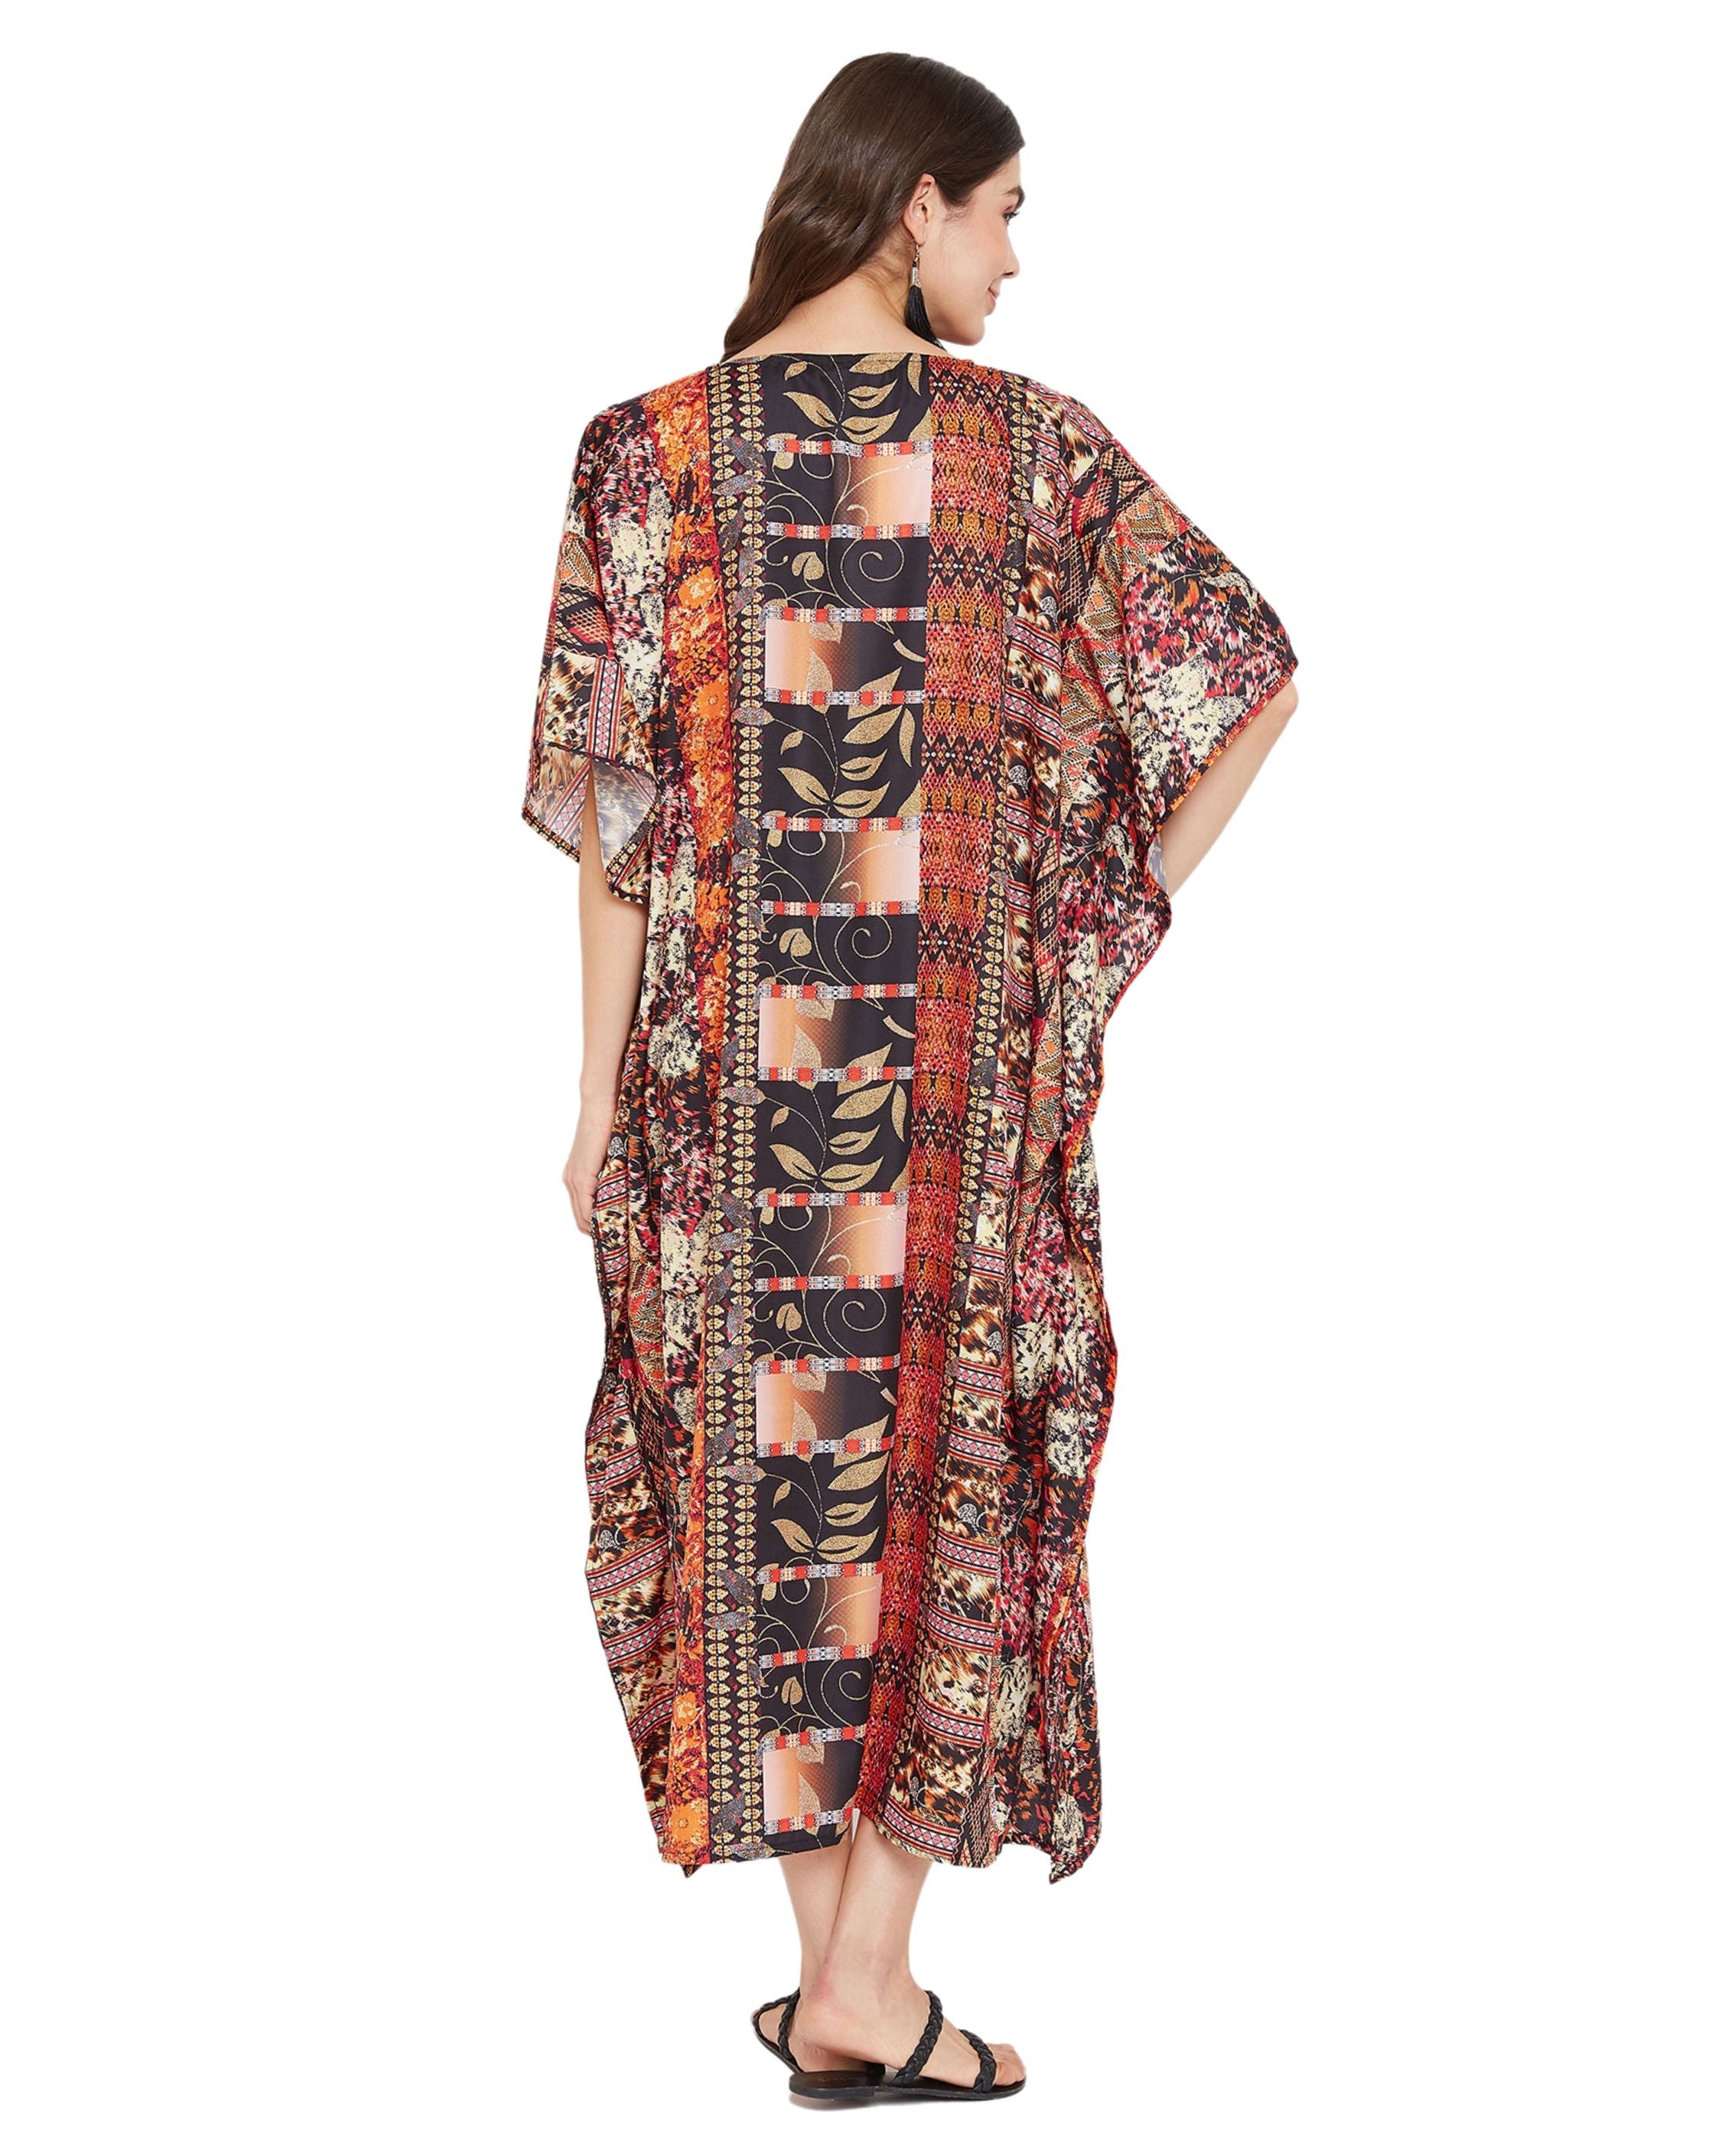 Abstract Printed Black Polyester Kaftan Dress for Women